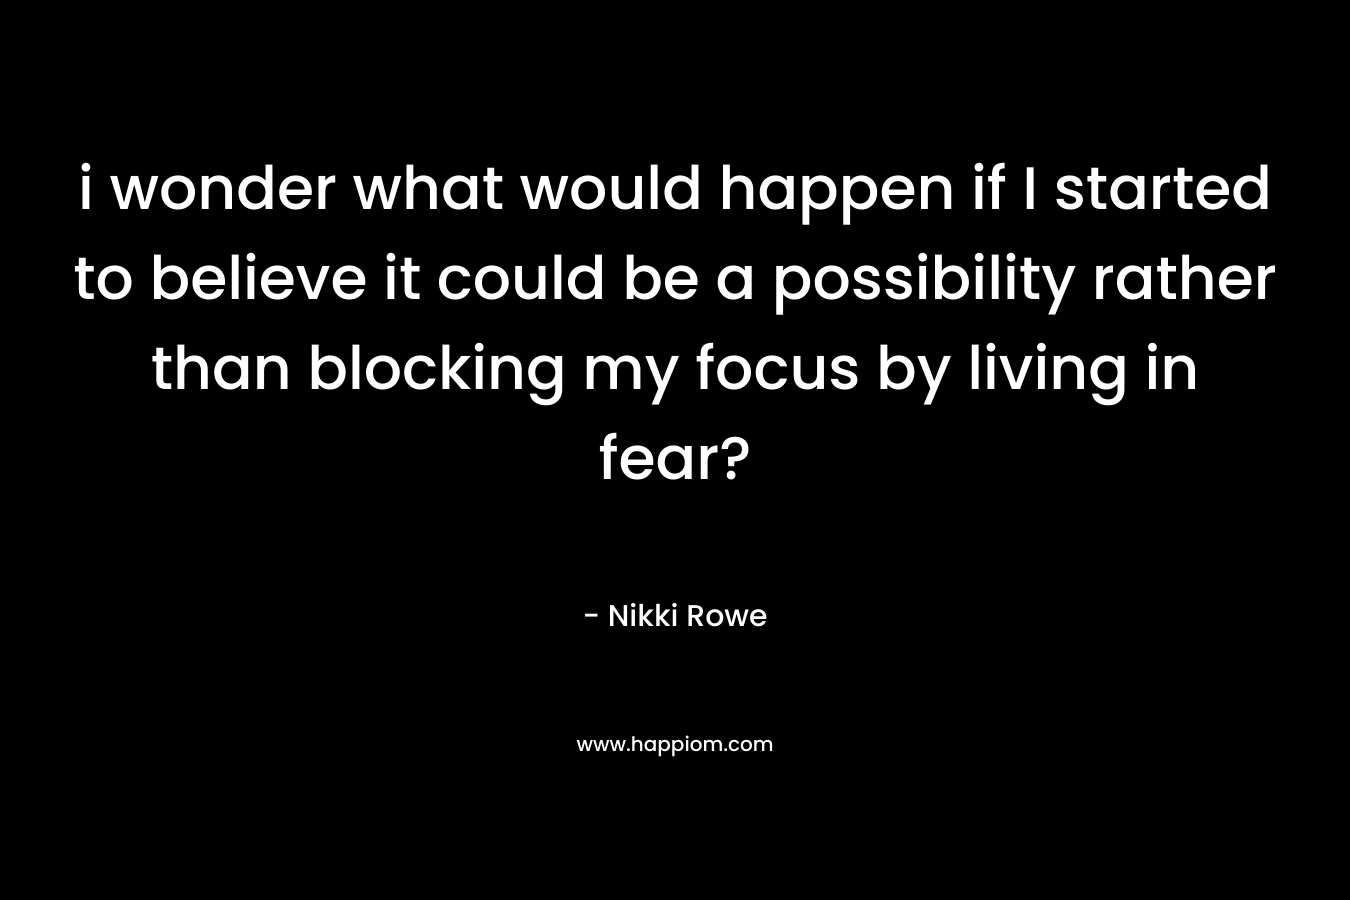 i wonder what would happen if I started to believe it could be a possibility rather than blocking my focus by living in fear?